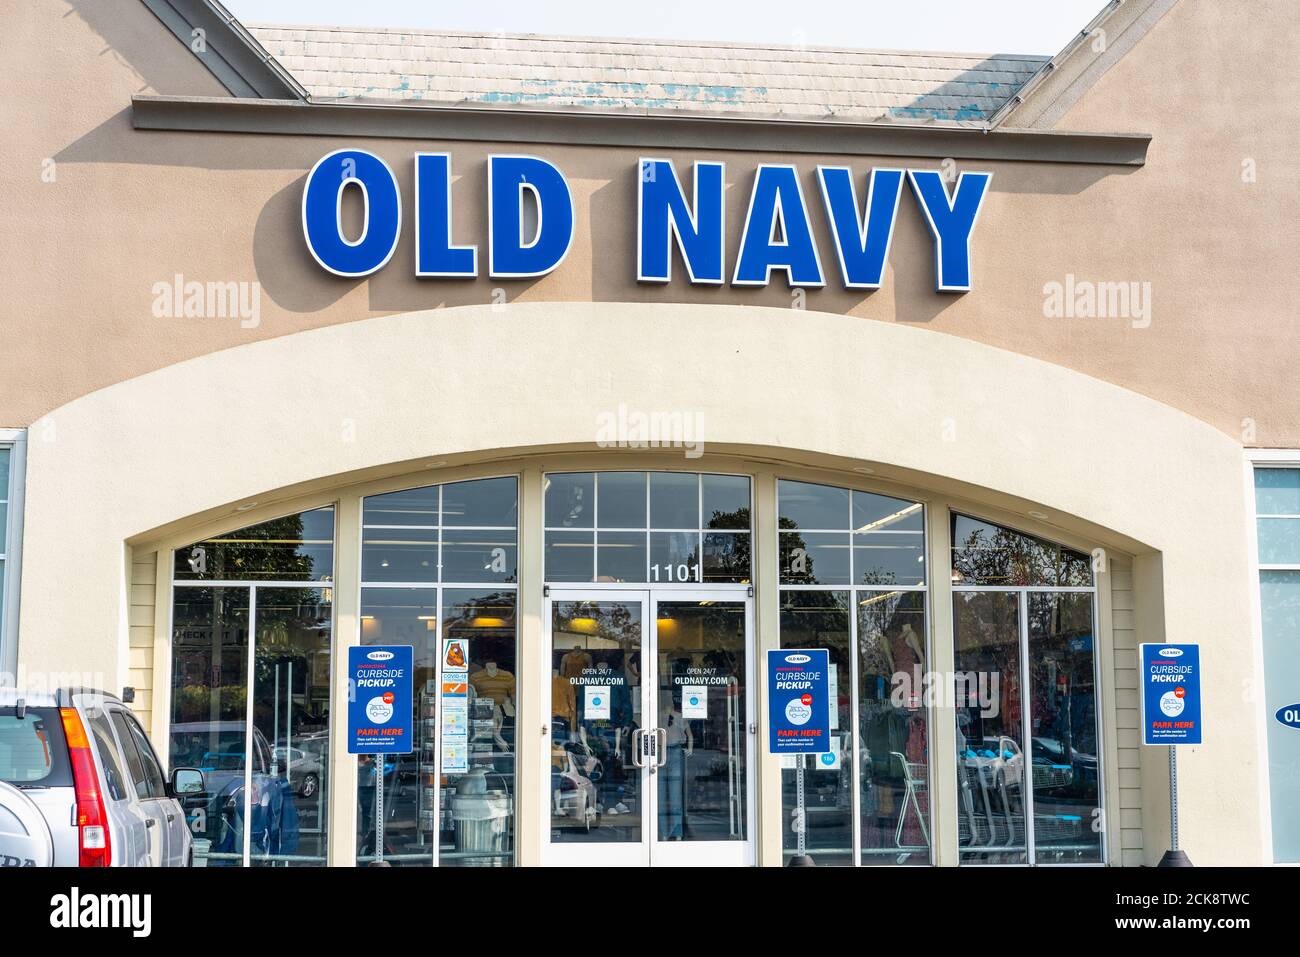 https://c8.alamy.com/comp/2CK8TWC/september-15-2020-redwood-city-ca-usa-old-navy-store-in-san-francisco-bay-area-old-navy-is-an-american-clothing-and-accessories-retailing-comp-2CK8TWC.jpg